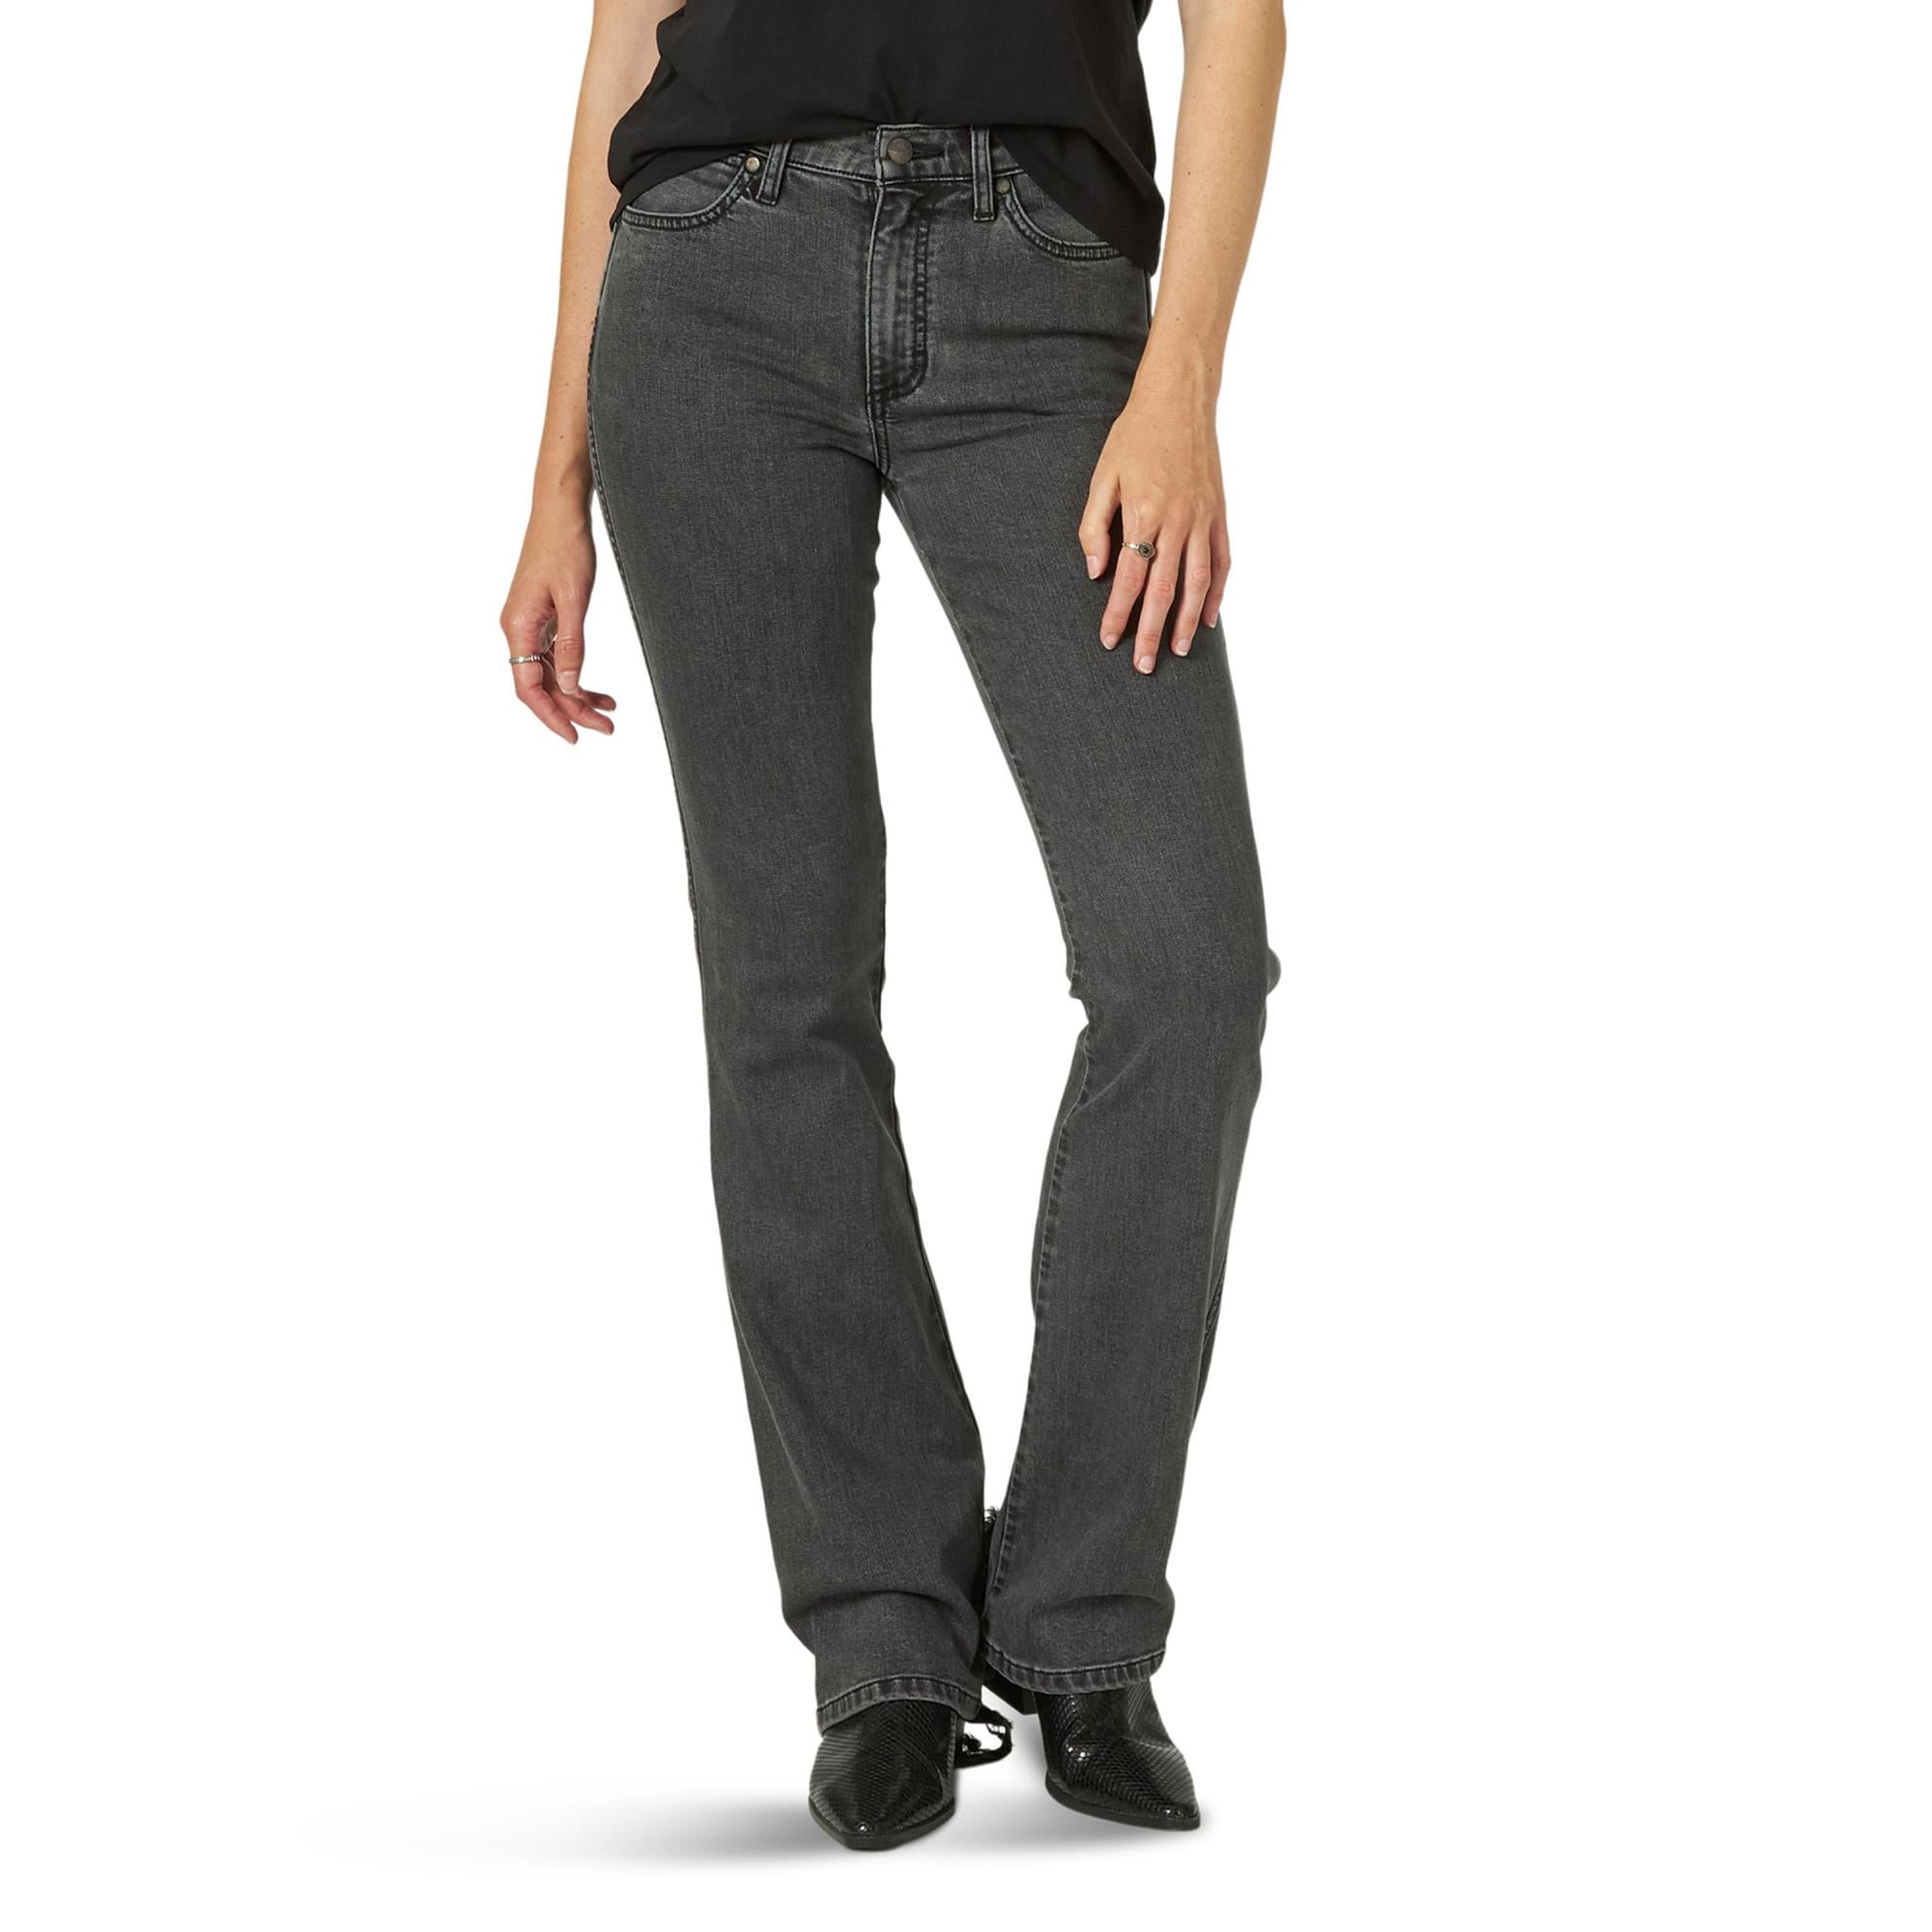 Wrangler Women's Exaggerated Boot Cut Jean 